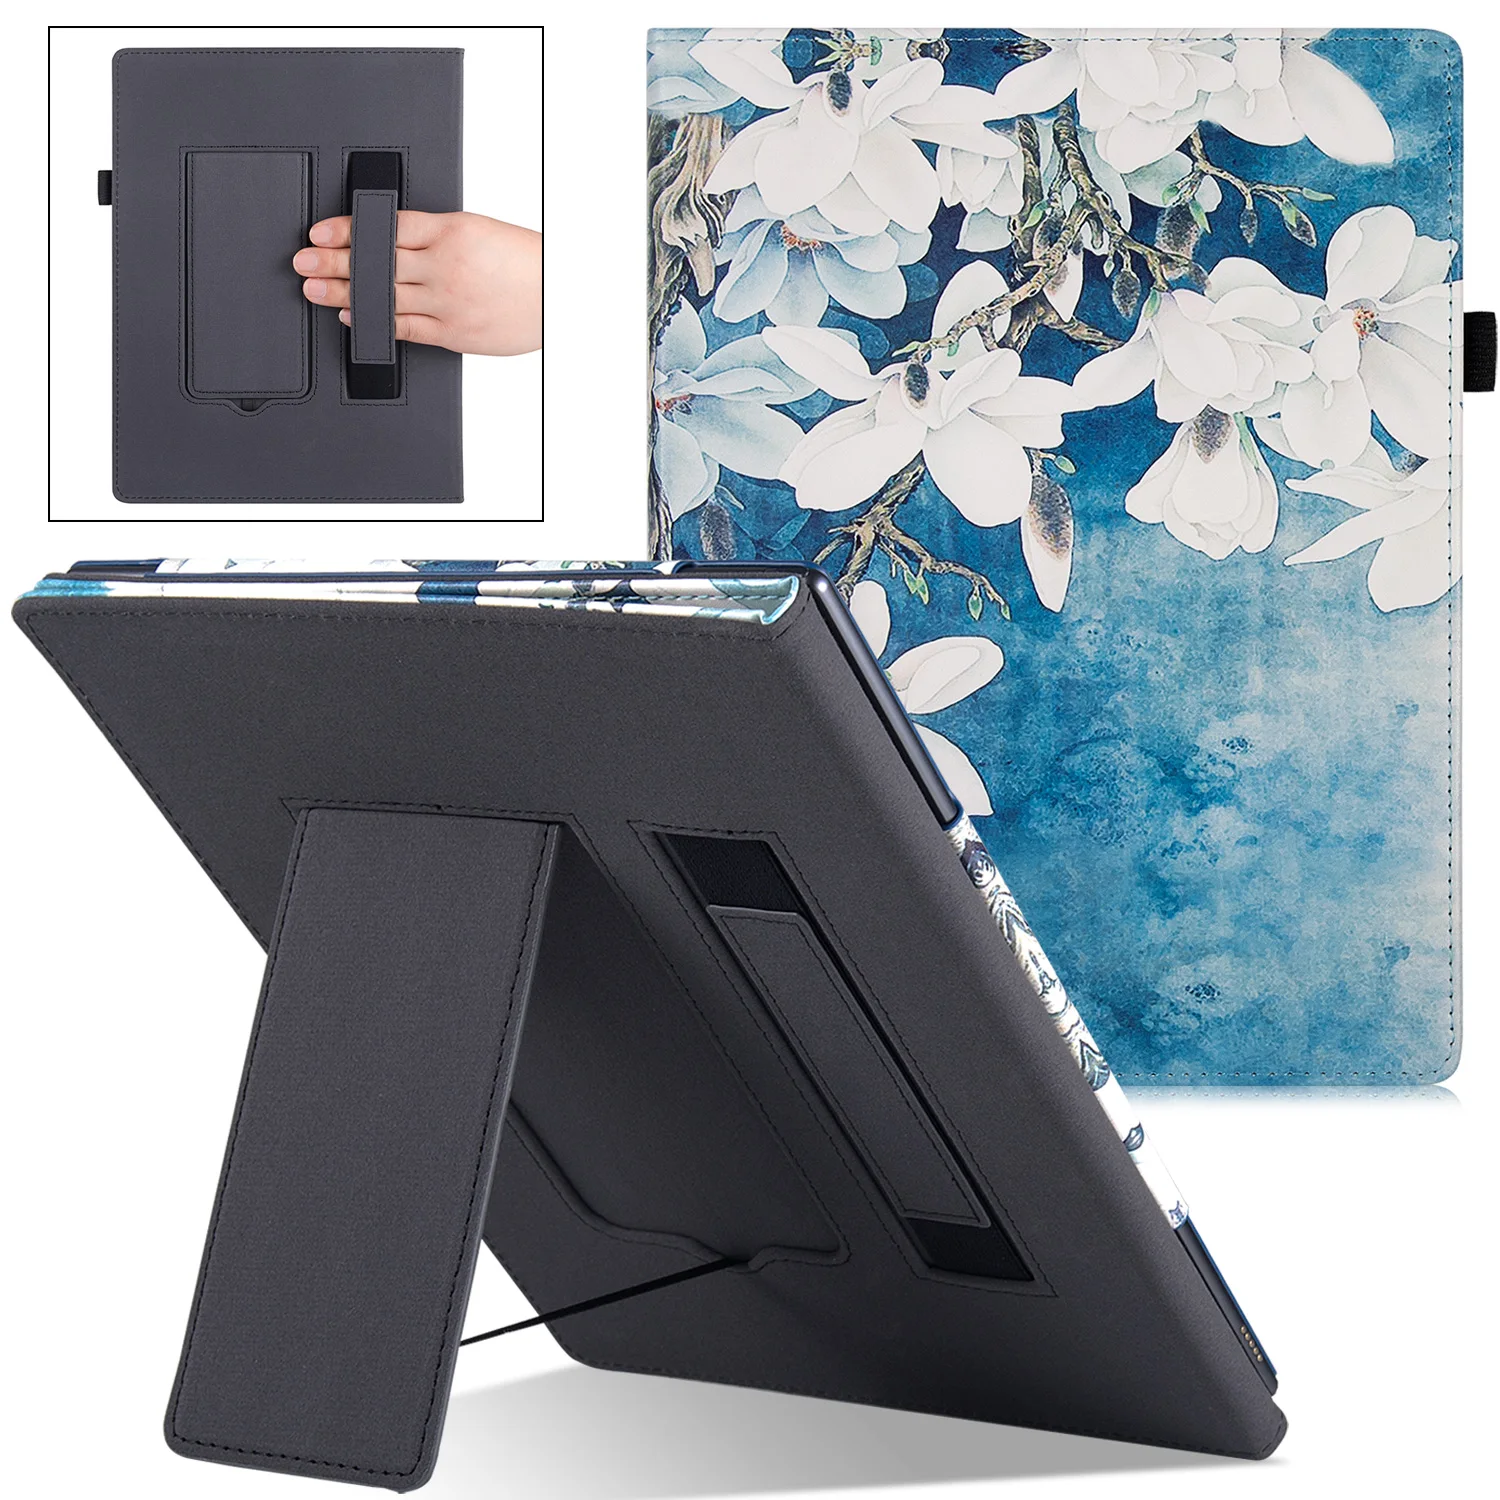 

reMarkable 2 Folio Case - Premium PU Leather Cover for reMarkable 2 Digital Paper Tablet 10.3 inch 2020 - with Stand/Hand Strap